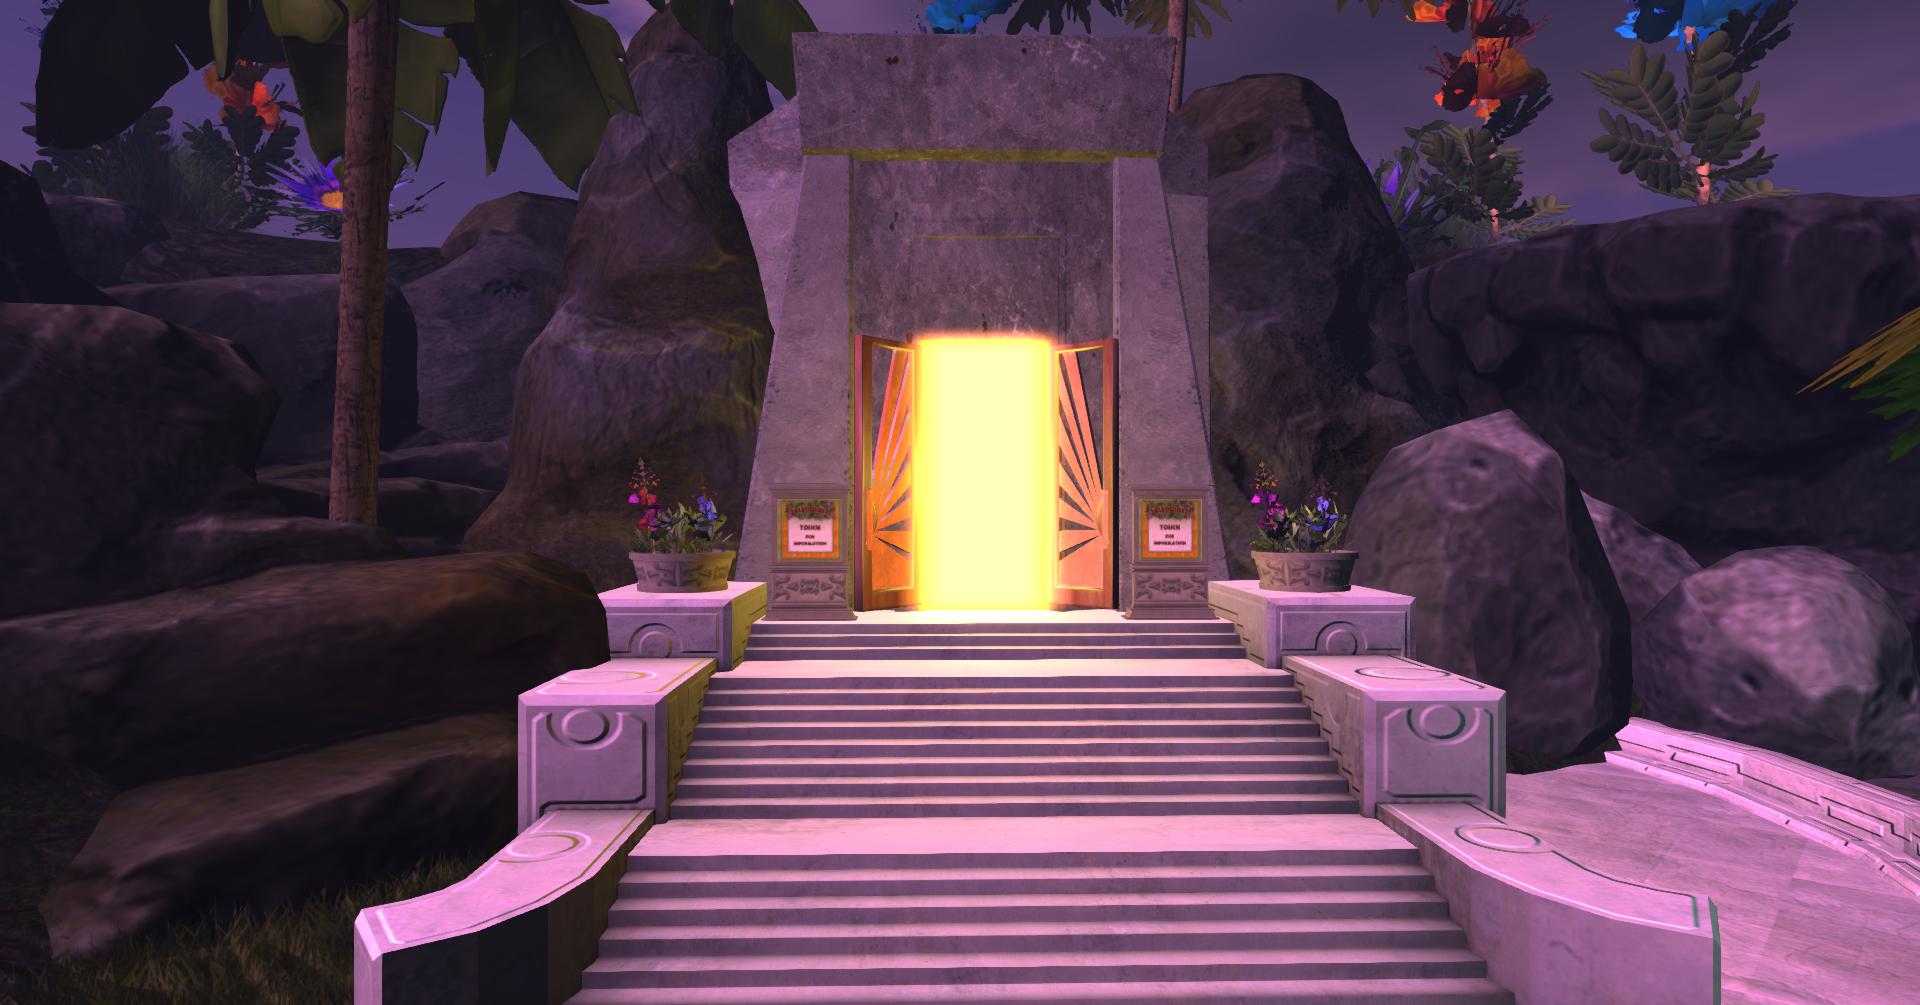 The portal to enter the game.